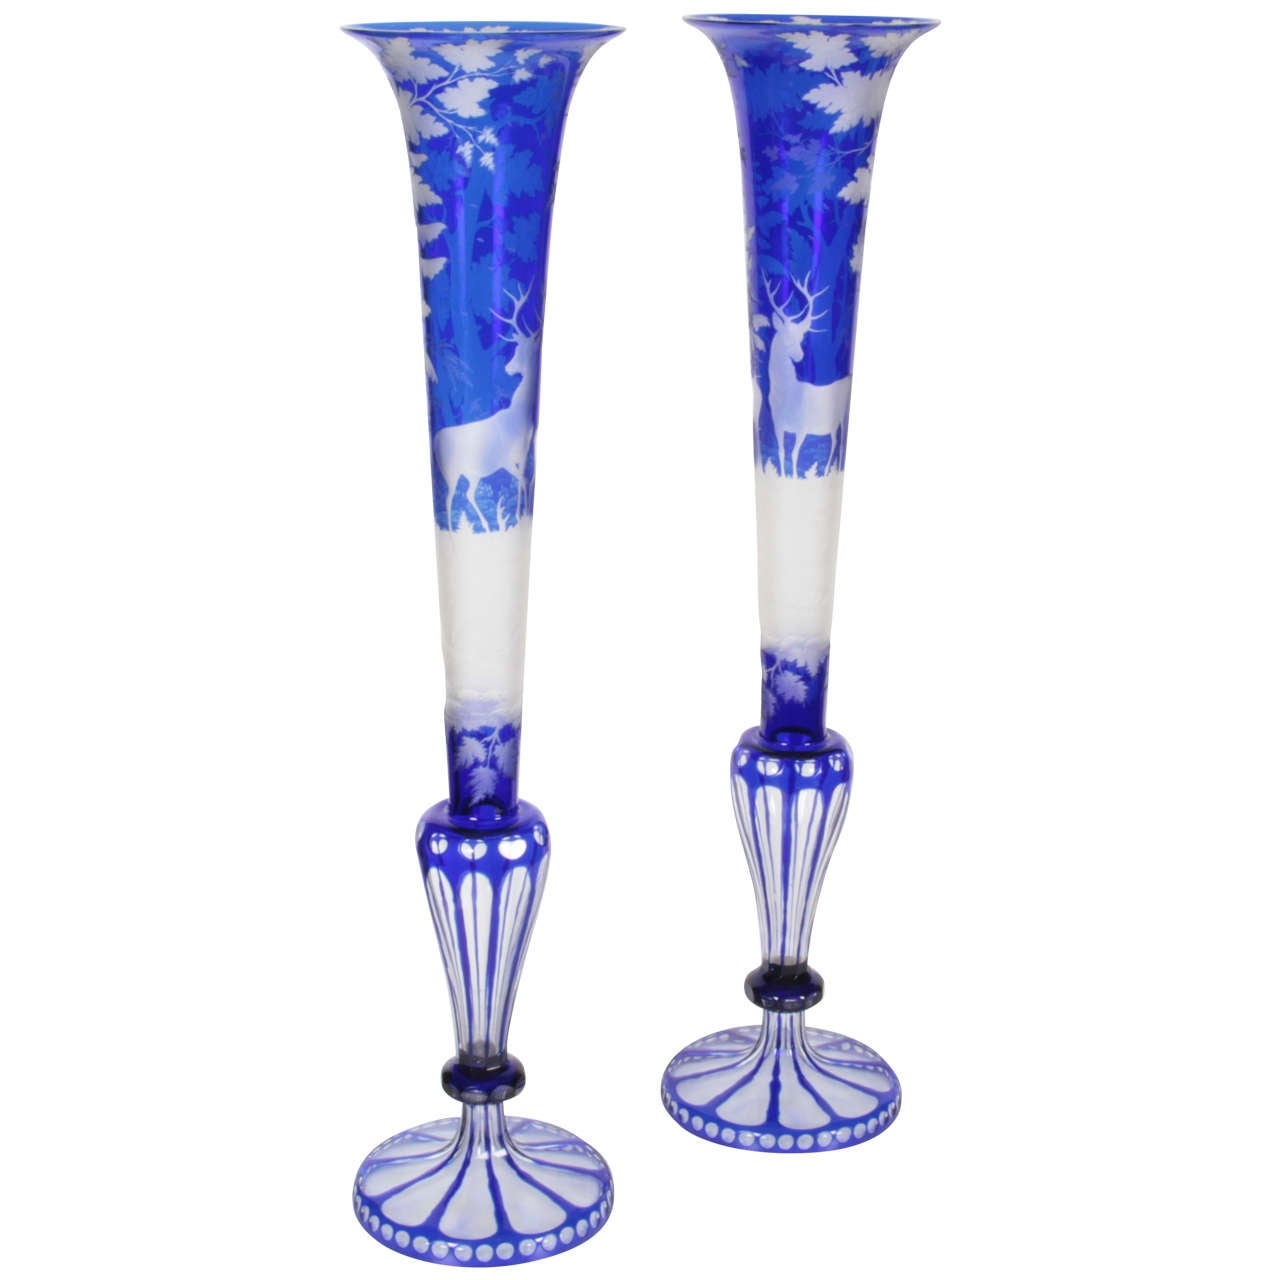 Magnificent Pair of Palatial Double Overlay Bohemian Trumpet Vases with Stags For Sale